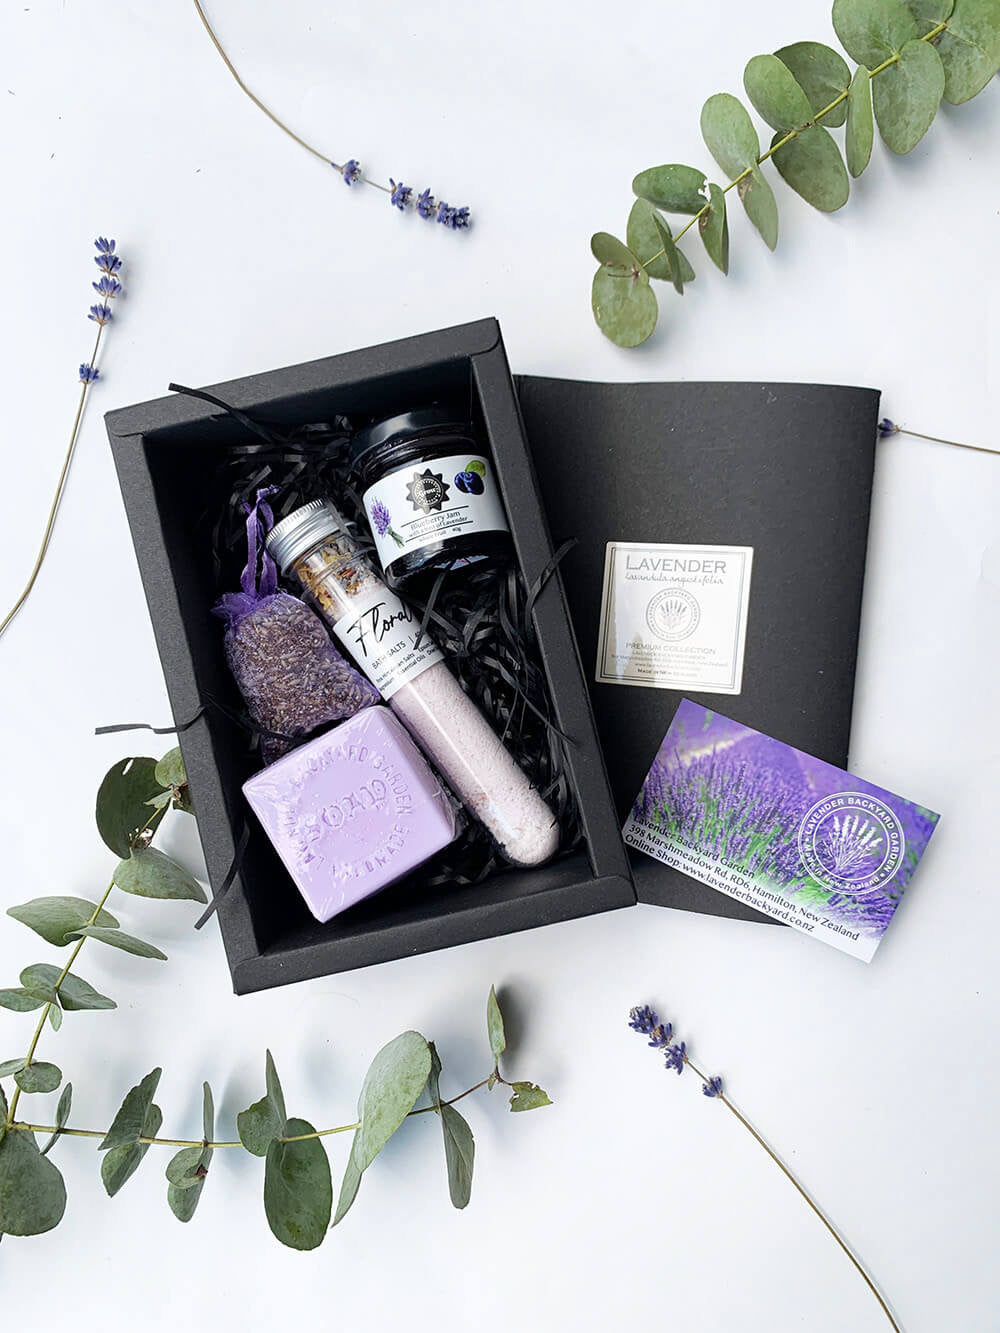 Sweet Thank You Gift Set, small gifts, containing blueberry jam, bath salt scented by lavender essential oil, handmade soap, lavender bag from NZ lavender farm